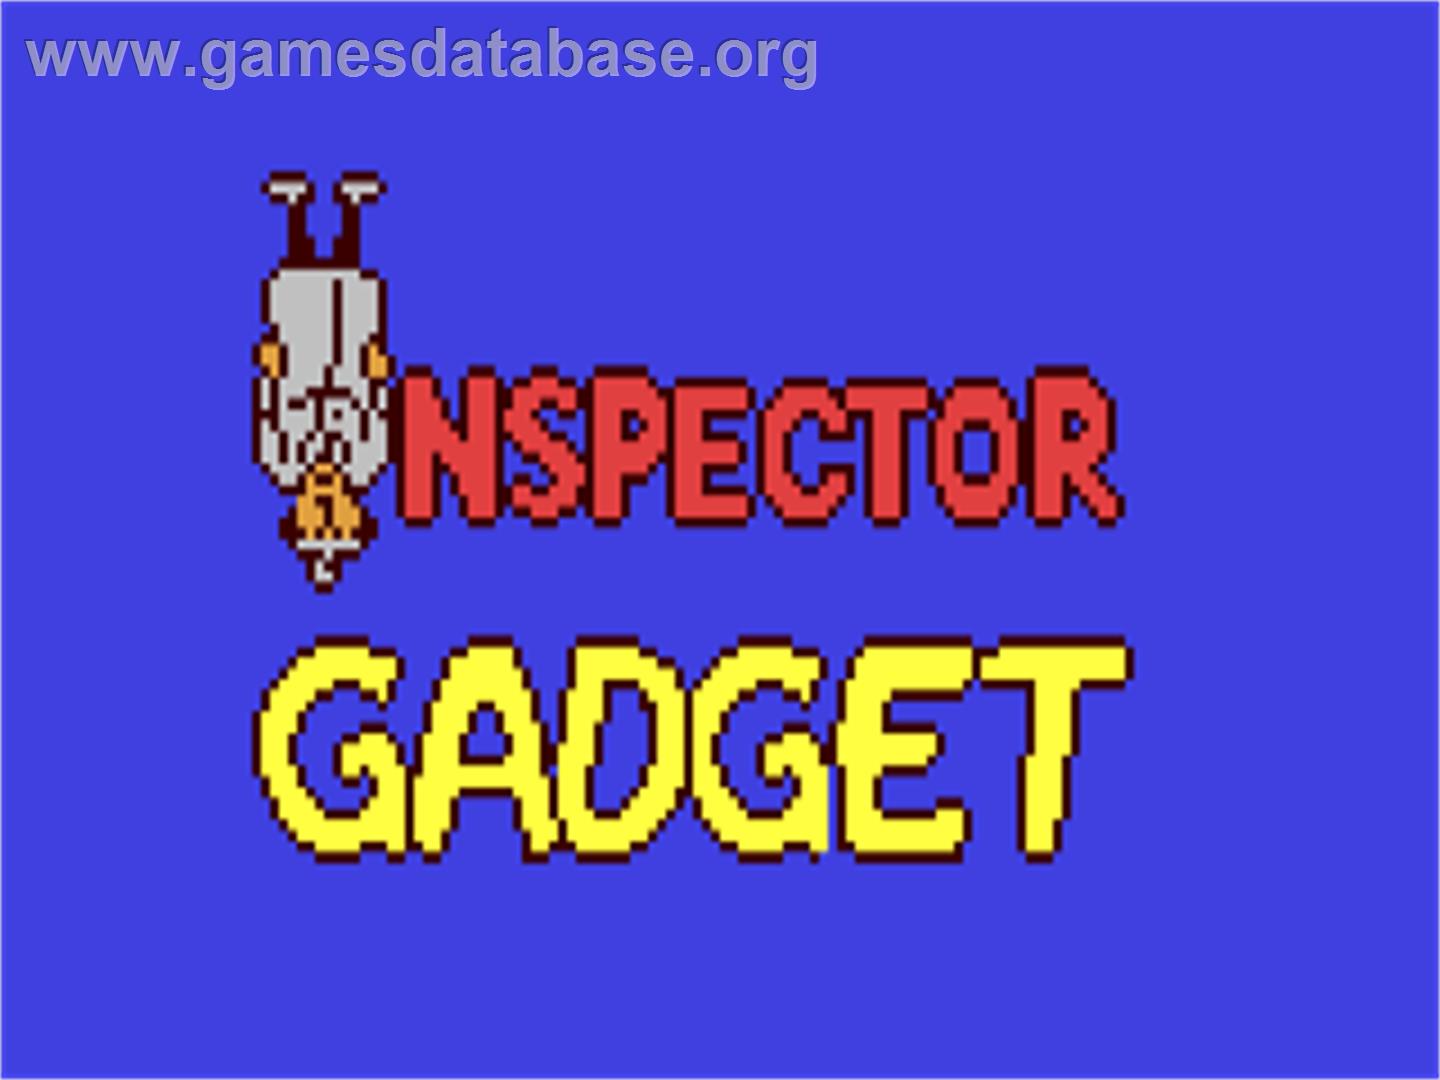 Inspector Gadget and the Circus of Fear - Commodore 64 - Artwork - Title Screen